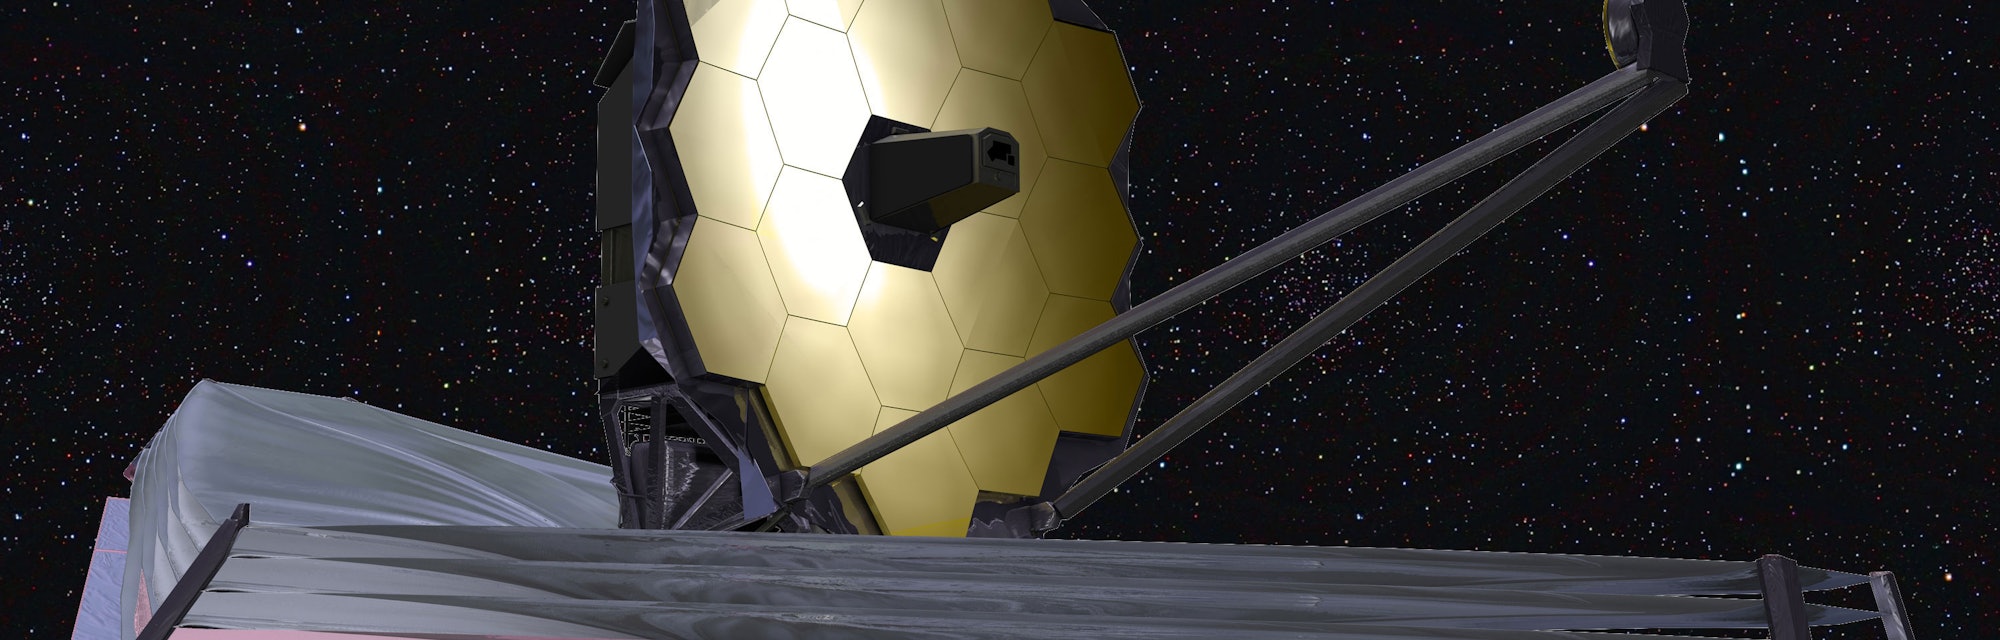 illustration of james webb space telescope in space